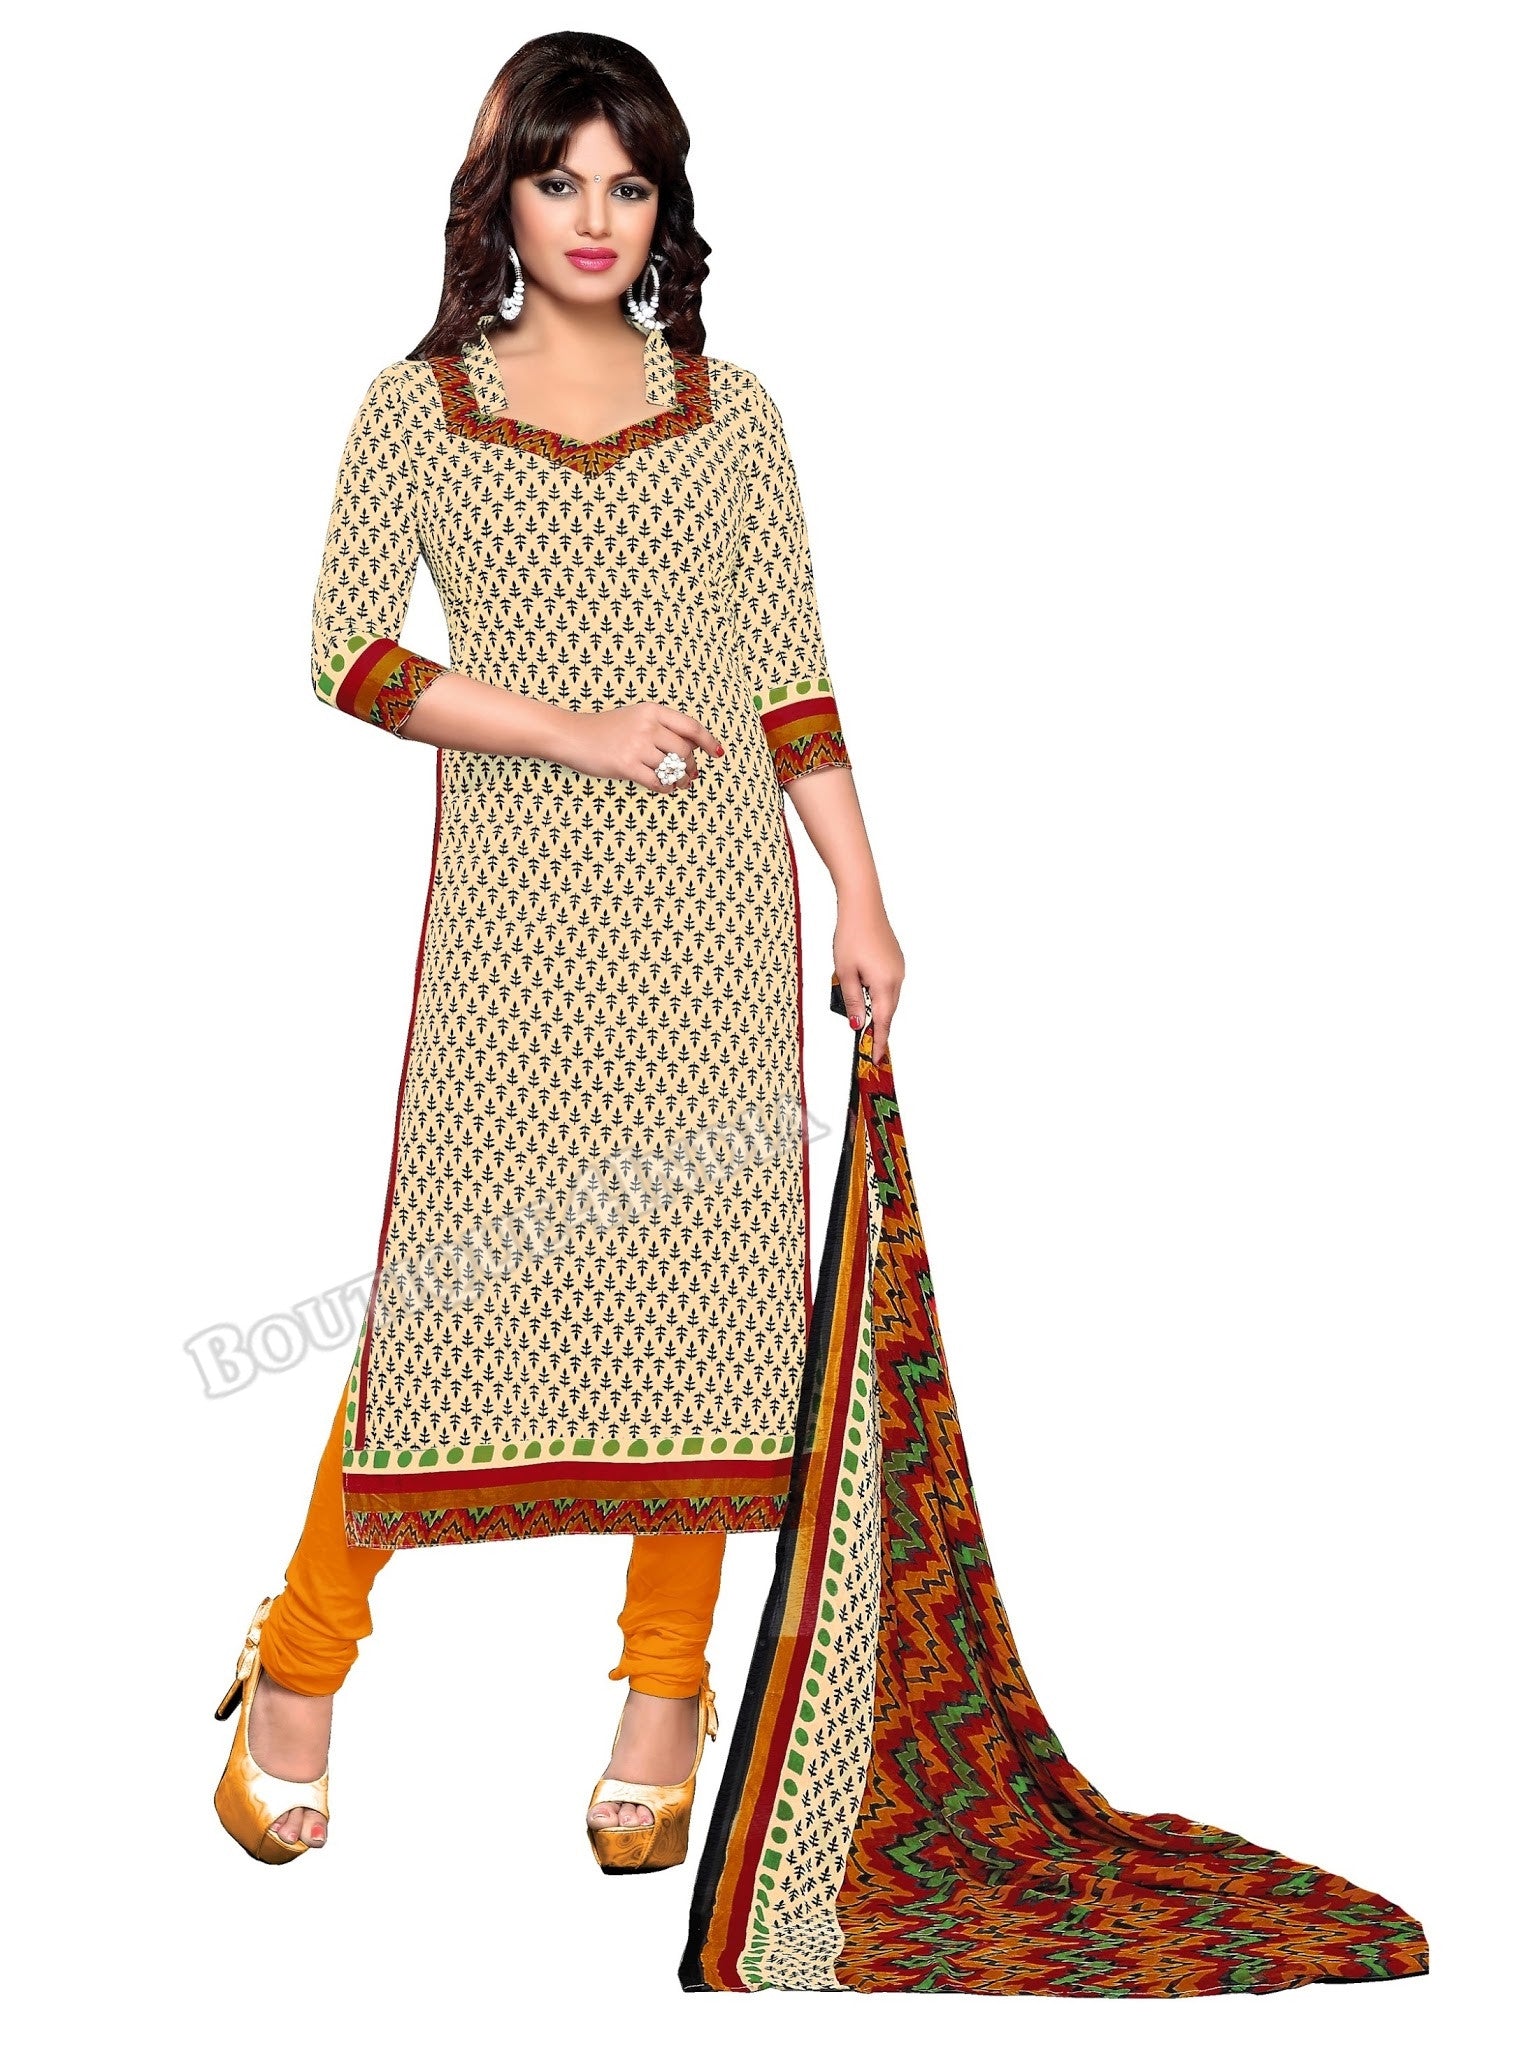 Beige, black and green Color Cotton printed Straight Cut Salwar Suit